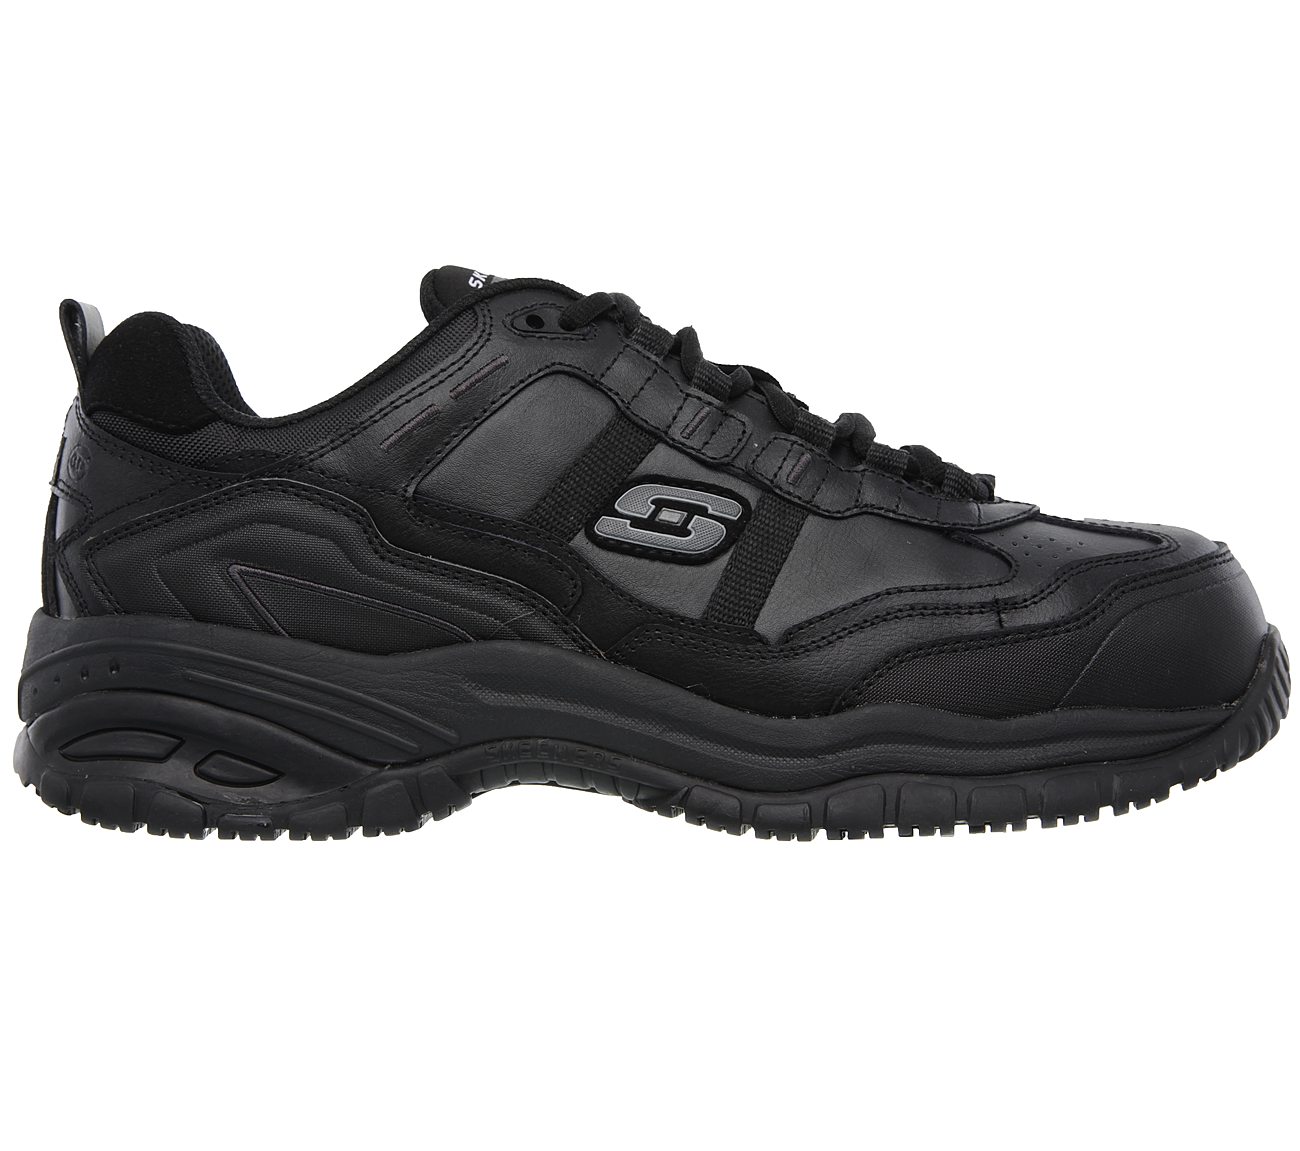 skechers 77013 review